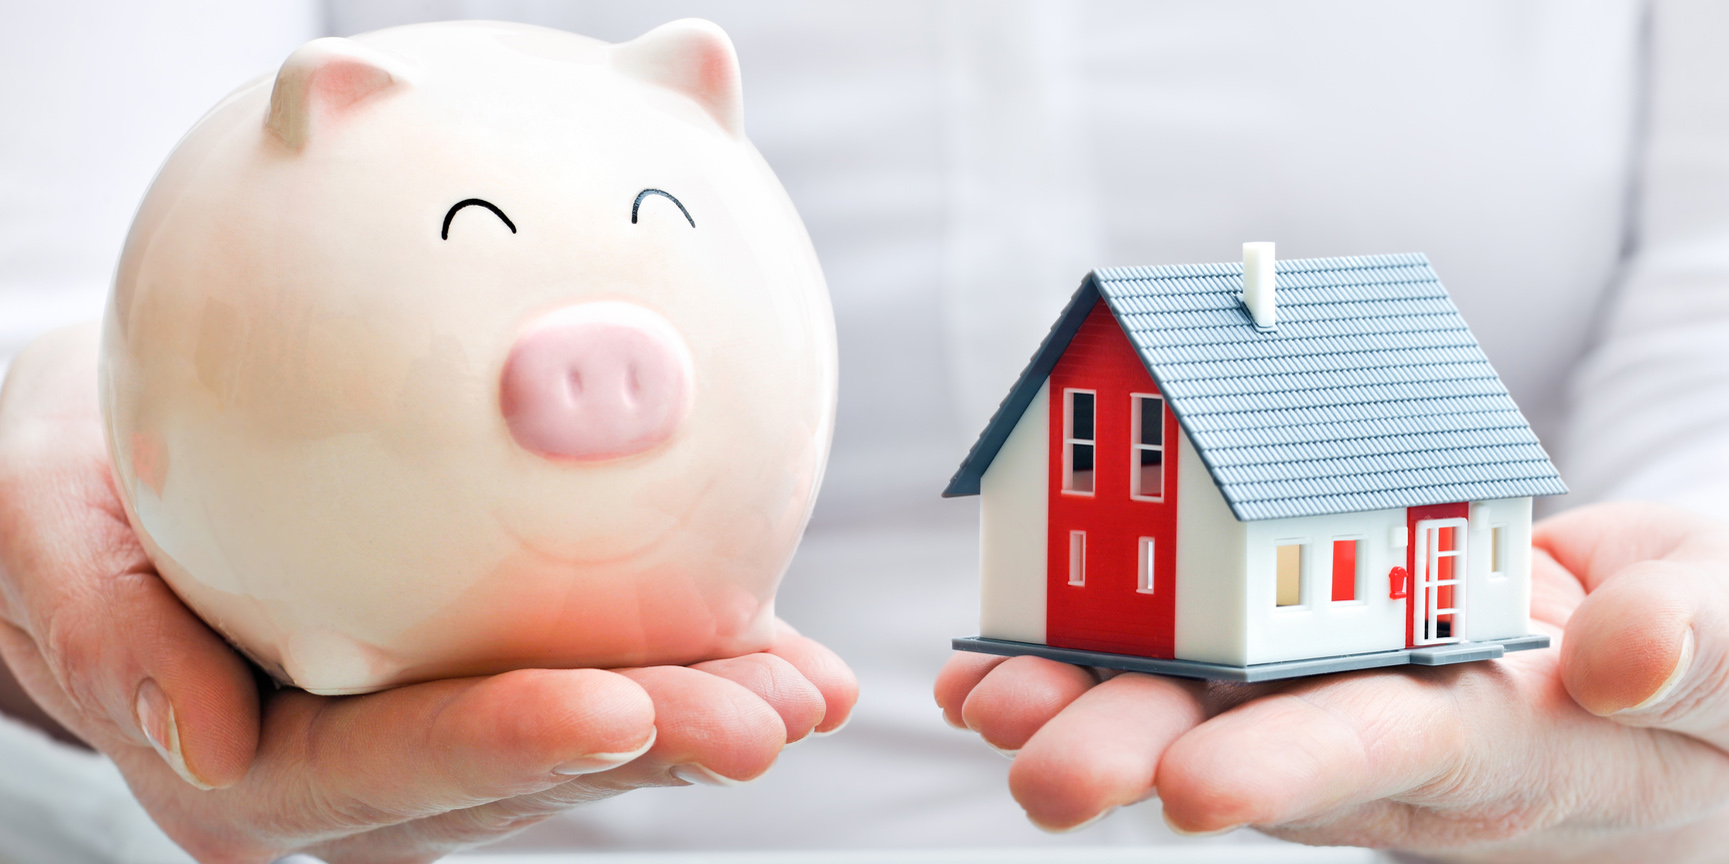 Ten tips for paying off your home loan sooner